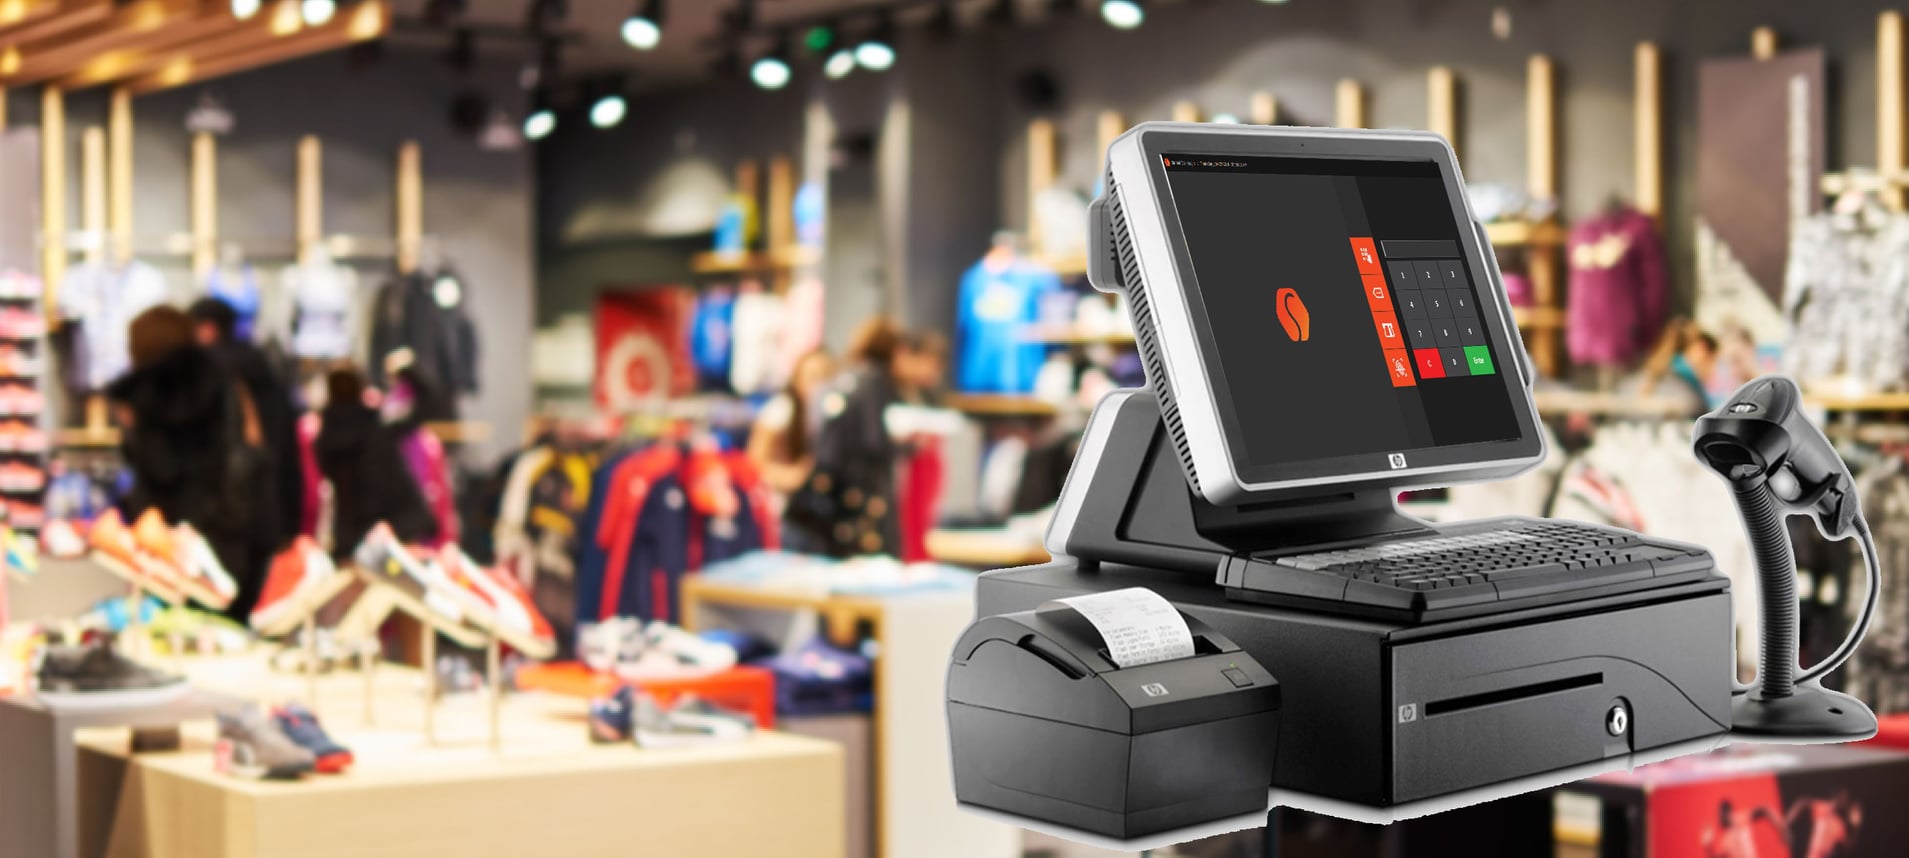 simbapos general retail software for point of sale